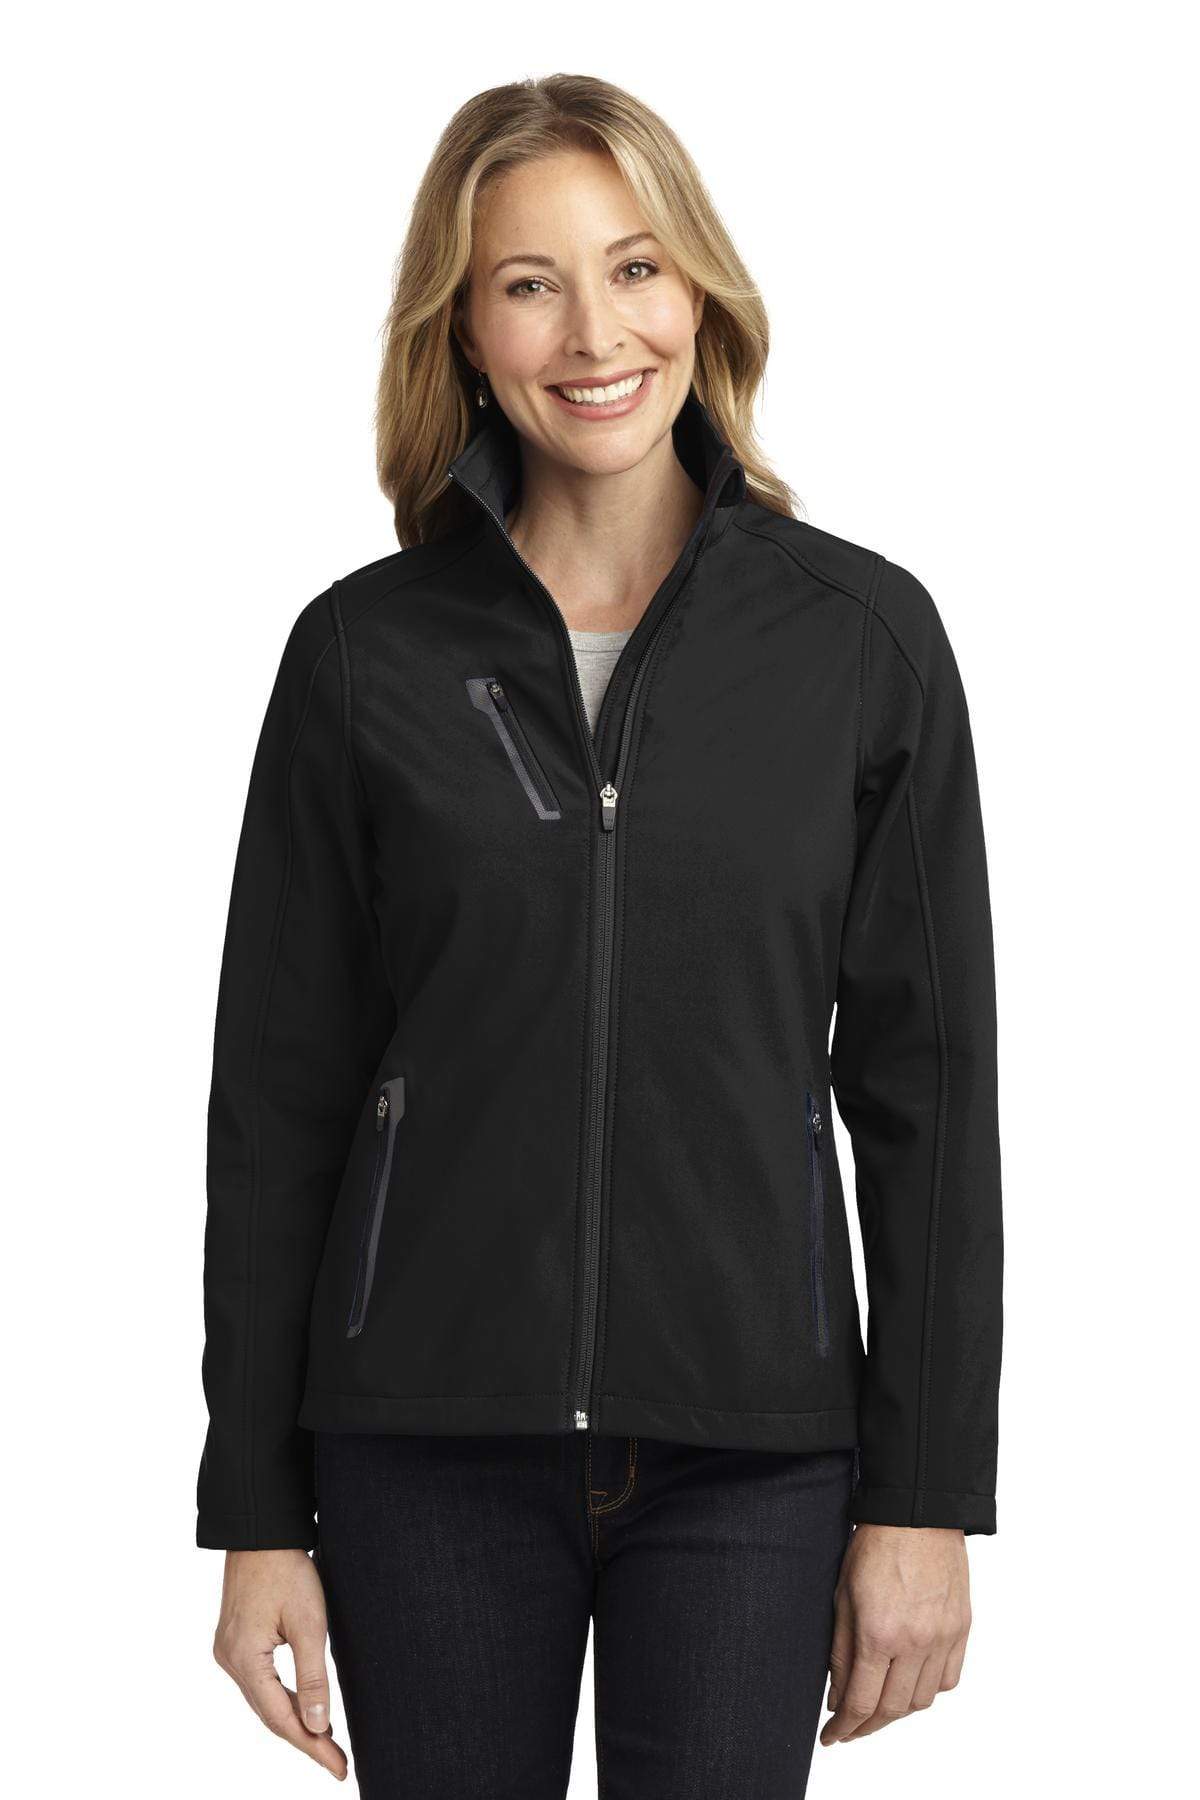 Port Authority Ladies Welded Soft Shell Jacket L3243082